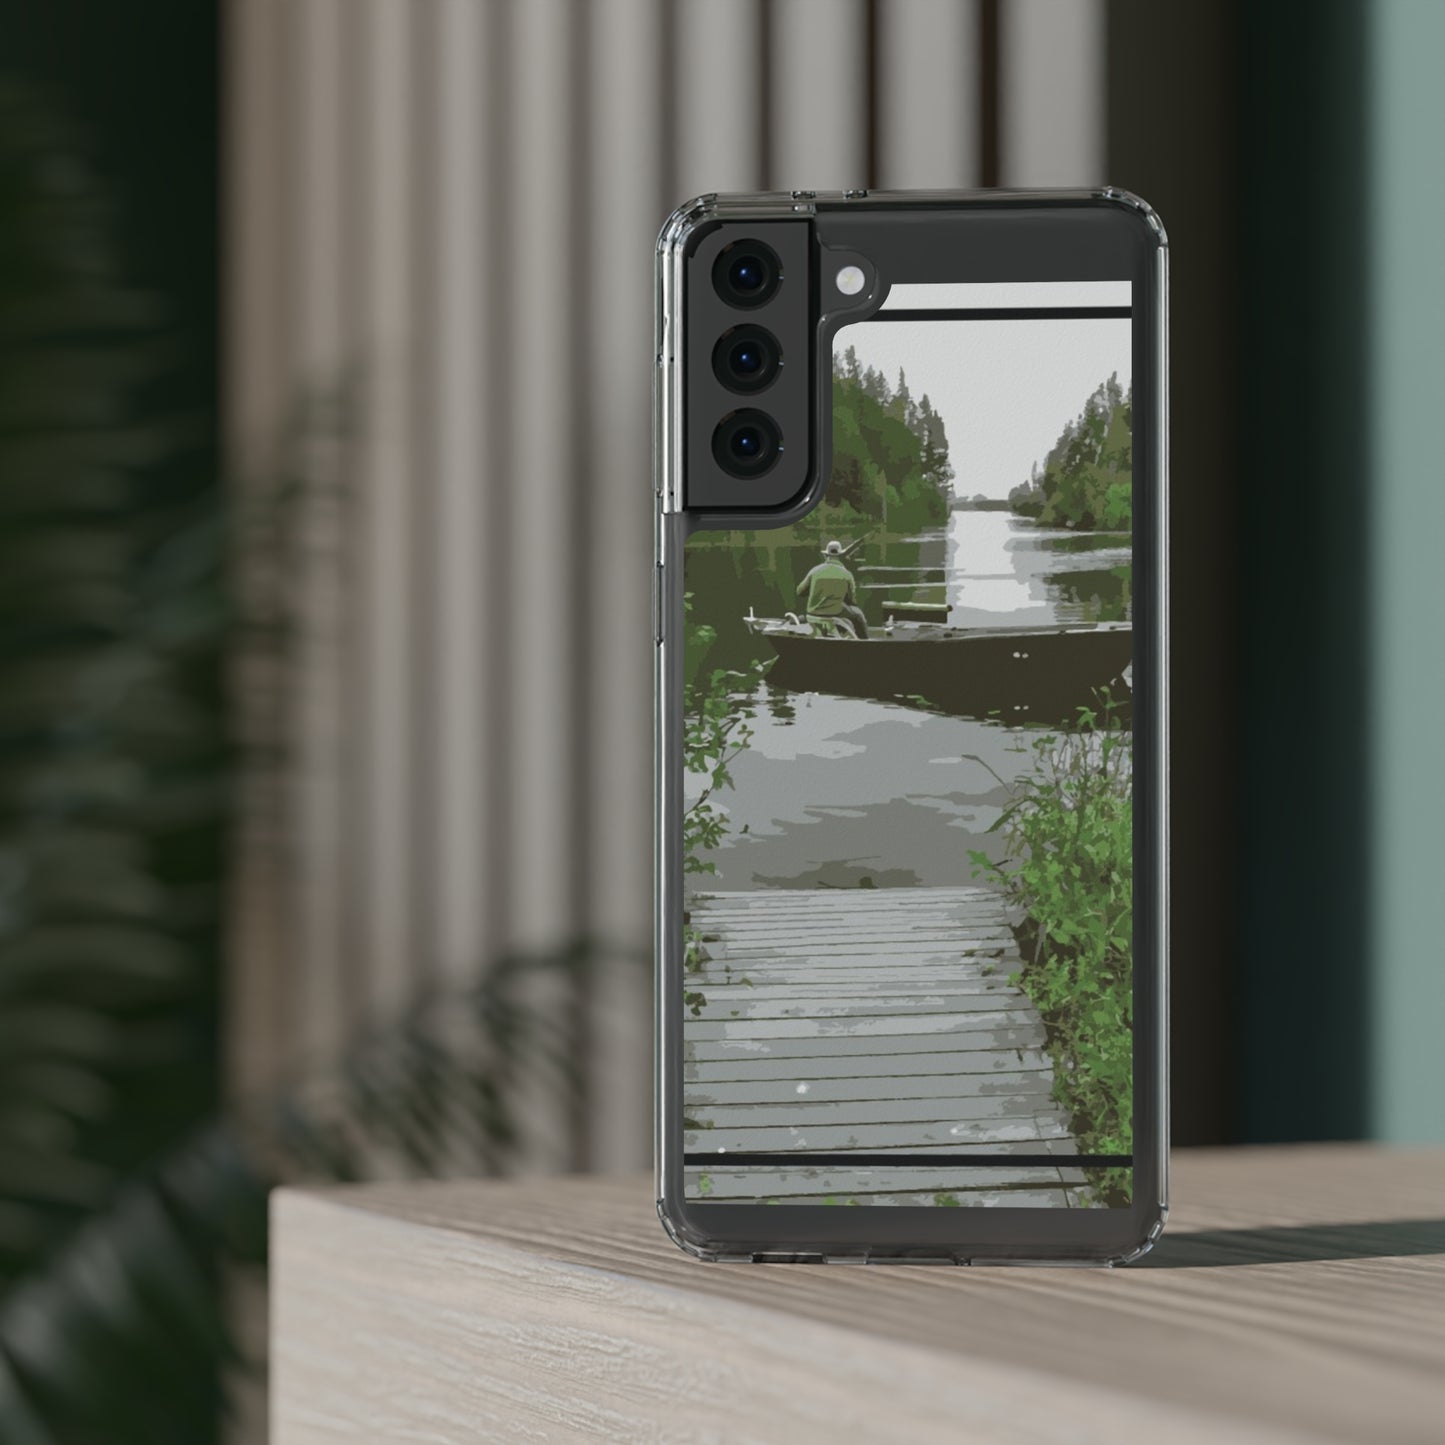 Lake Styled clear Phone case